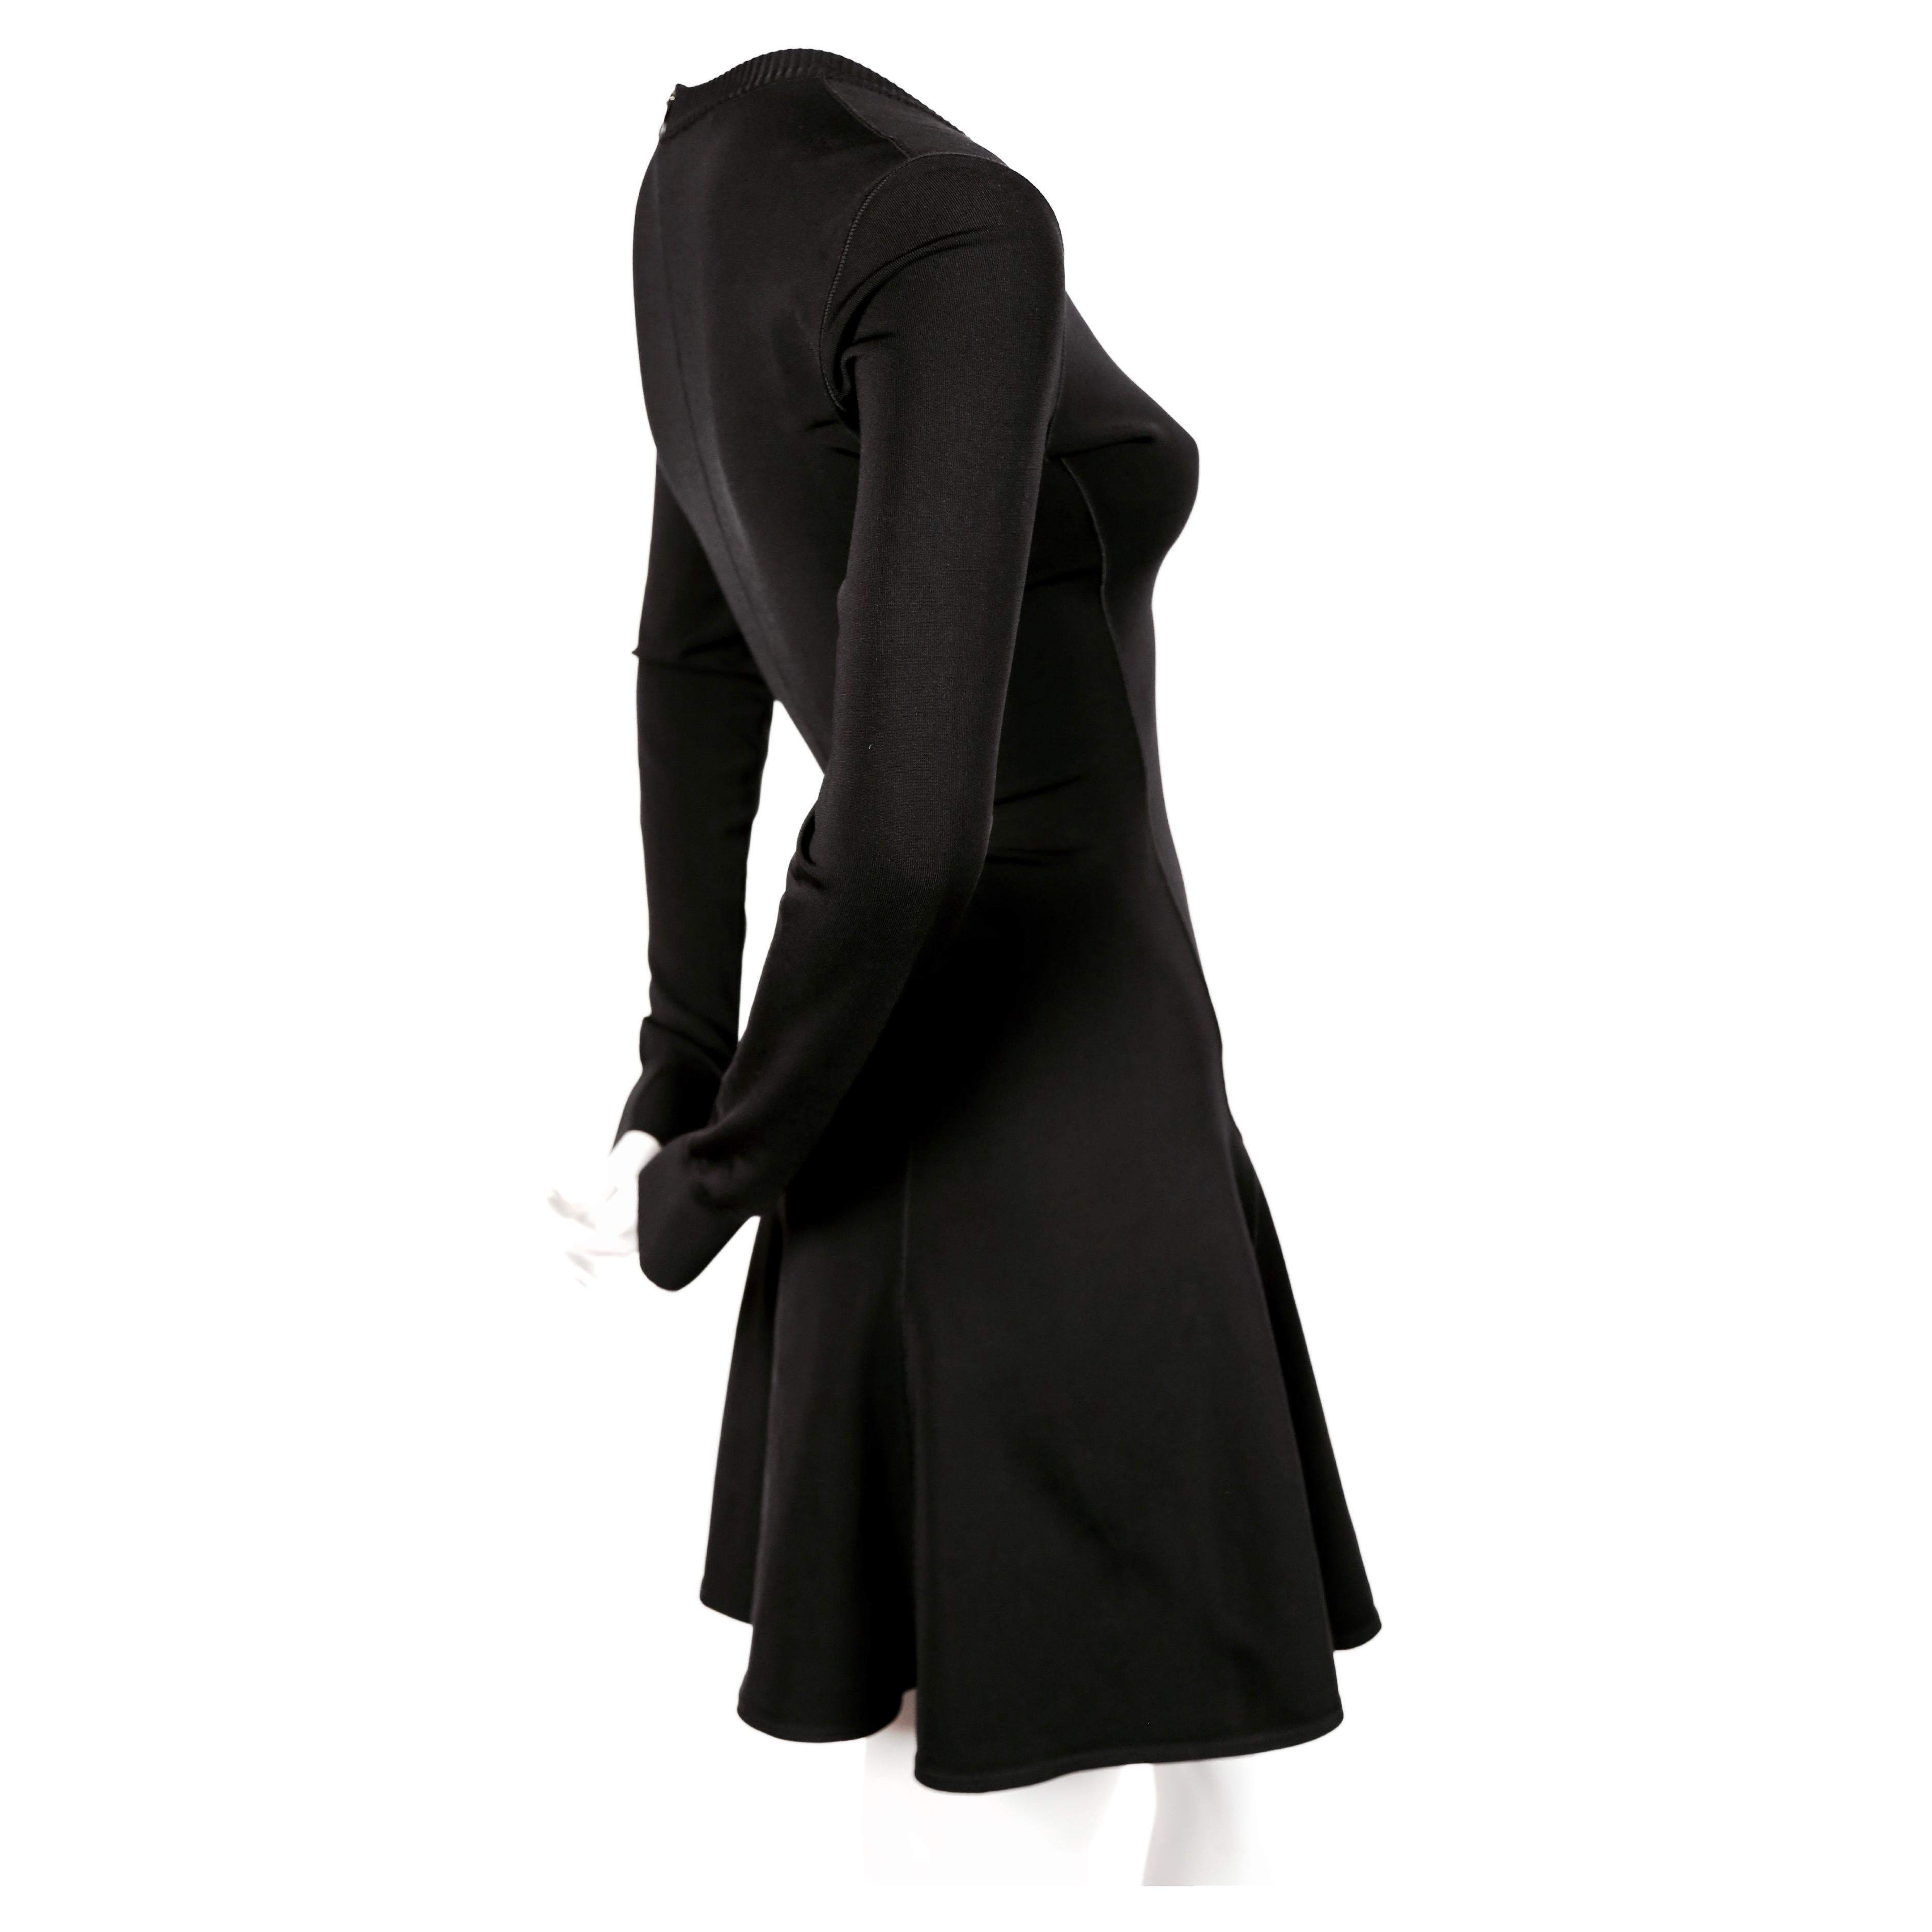 Jet black skater dress with V-neckline and long sleeves designed by Azzedine Alaia dating to the early 1990's. Size XS. Approximate measurements (unstretched): shoulder 14